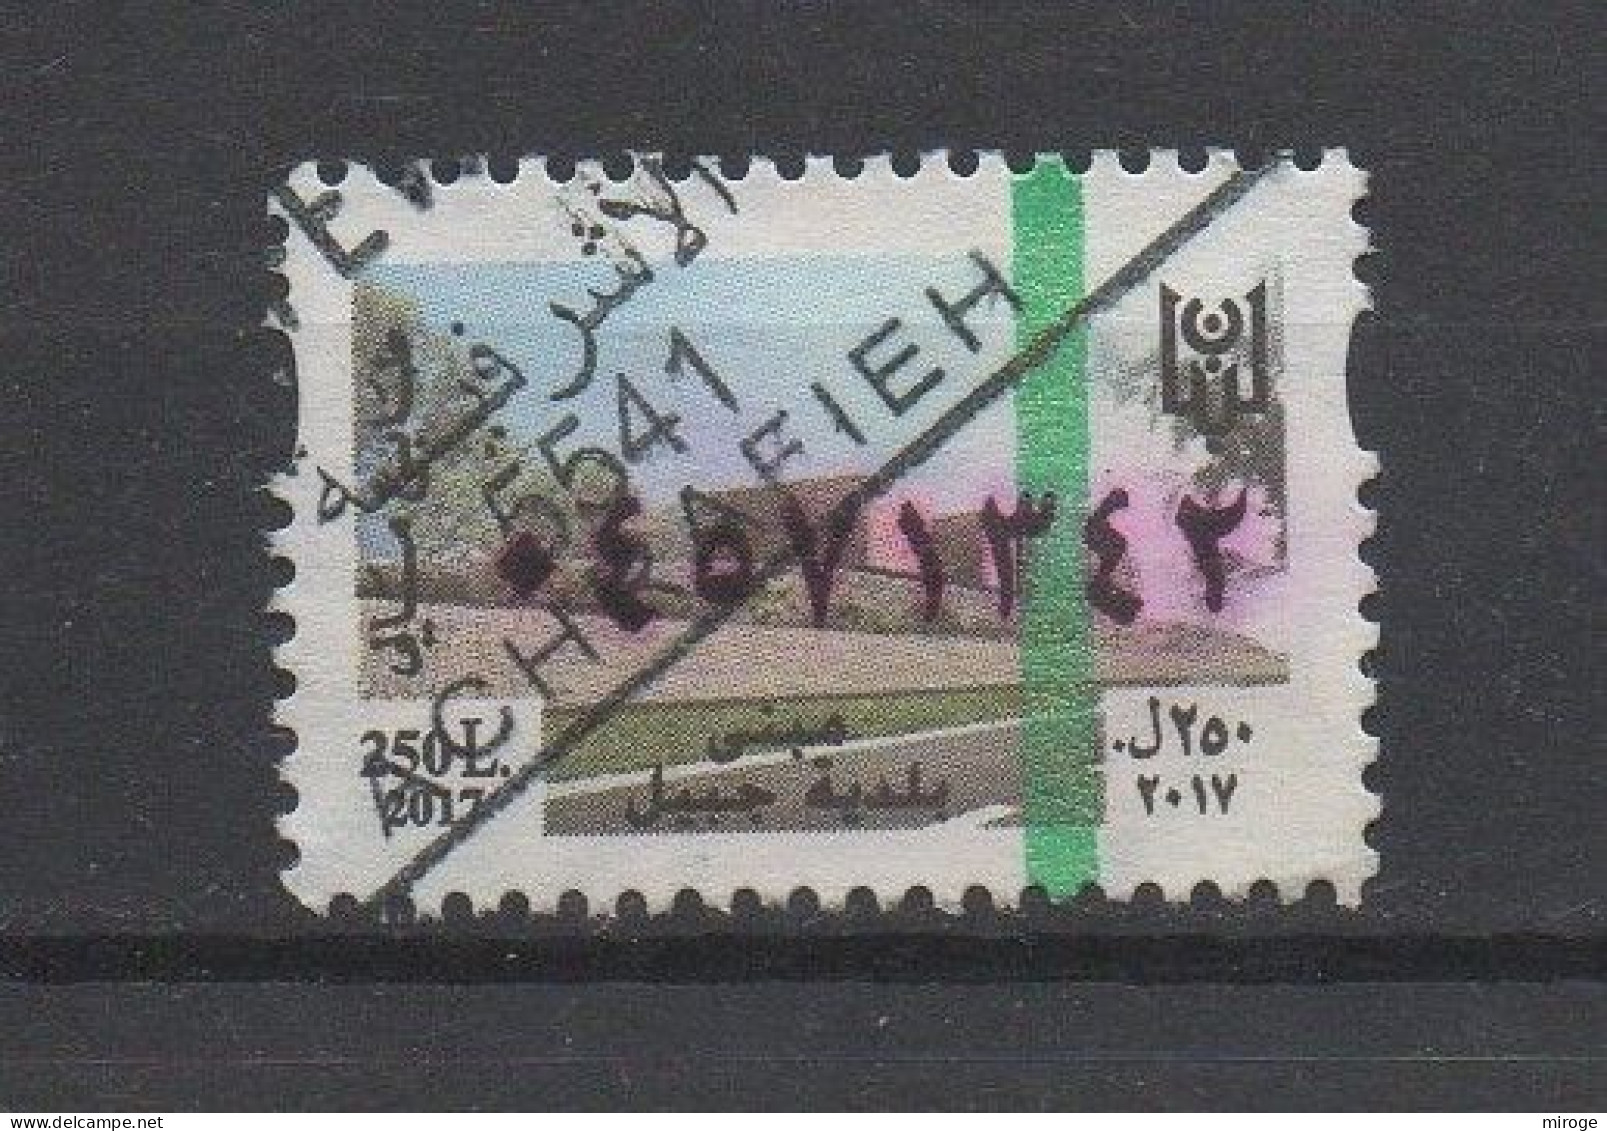 Lebanon Jbeil Fiscal 2017 250L Used Revenue Stamp, Timbre Liban - Líbano